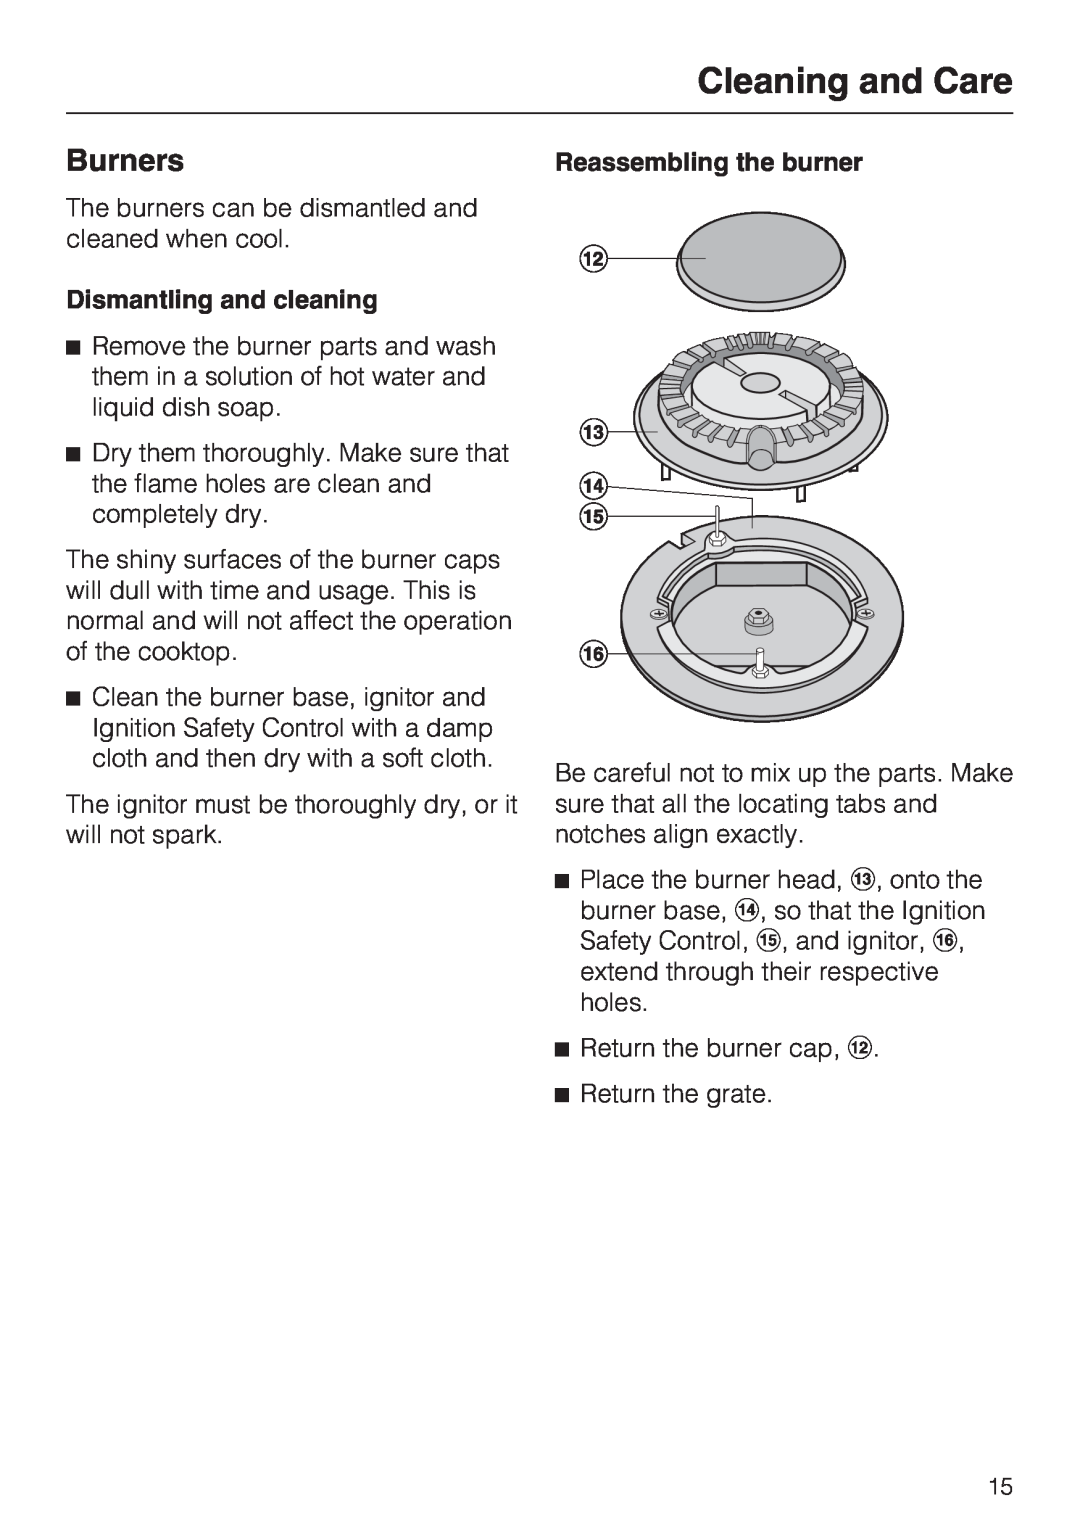 Miele KM 360 operating instructions Burners, Dismantling and cleaning, Reassembling the burner, Cleaning and Care 